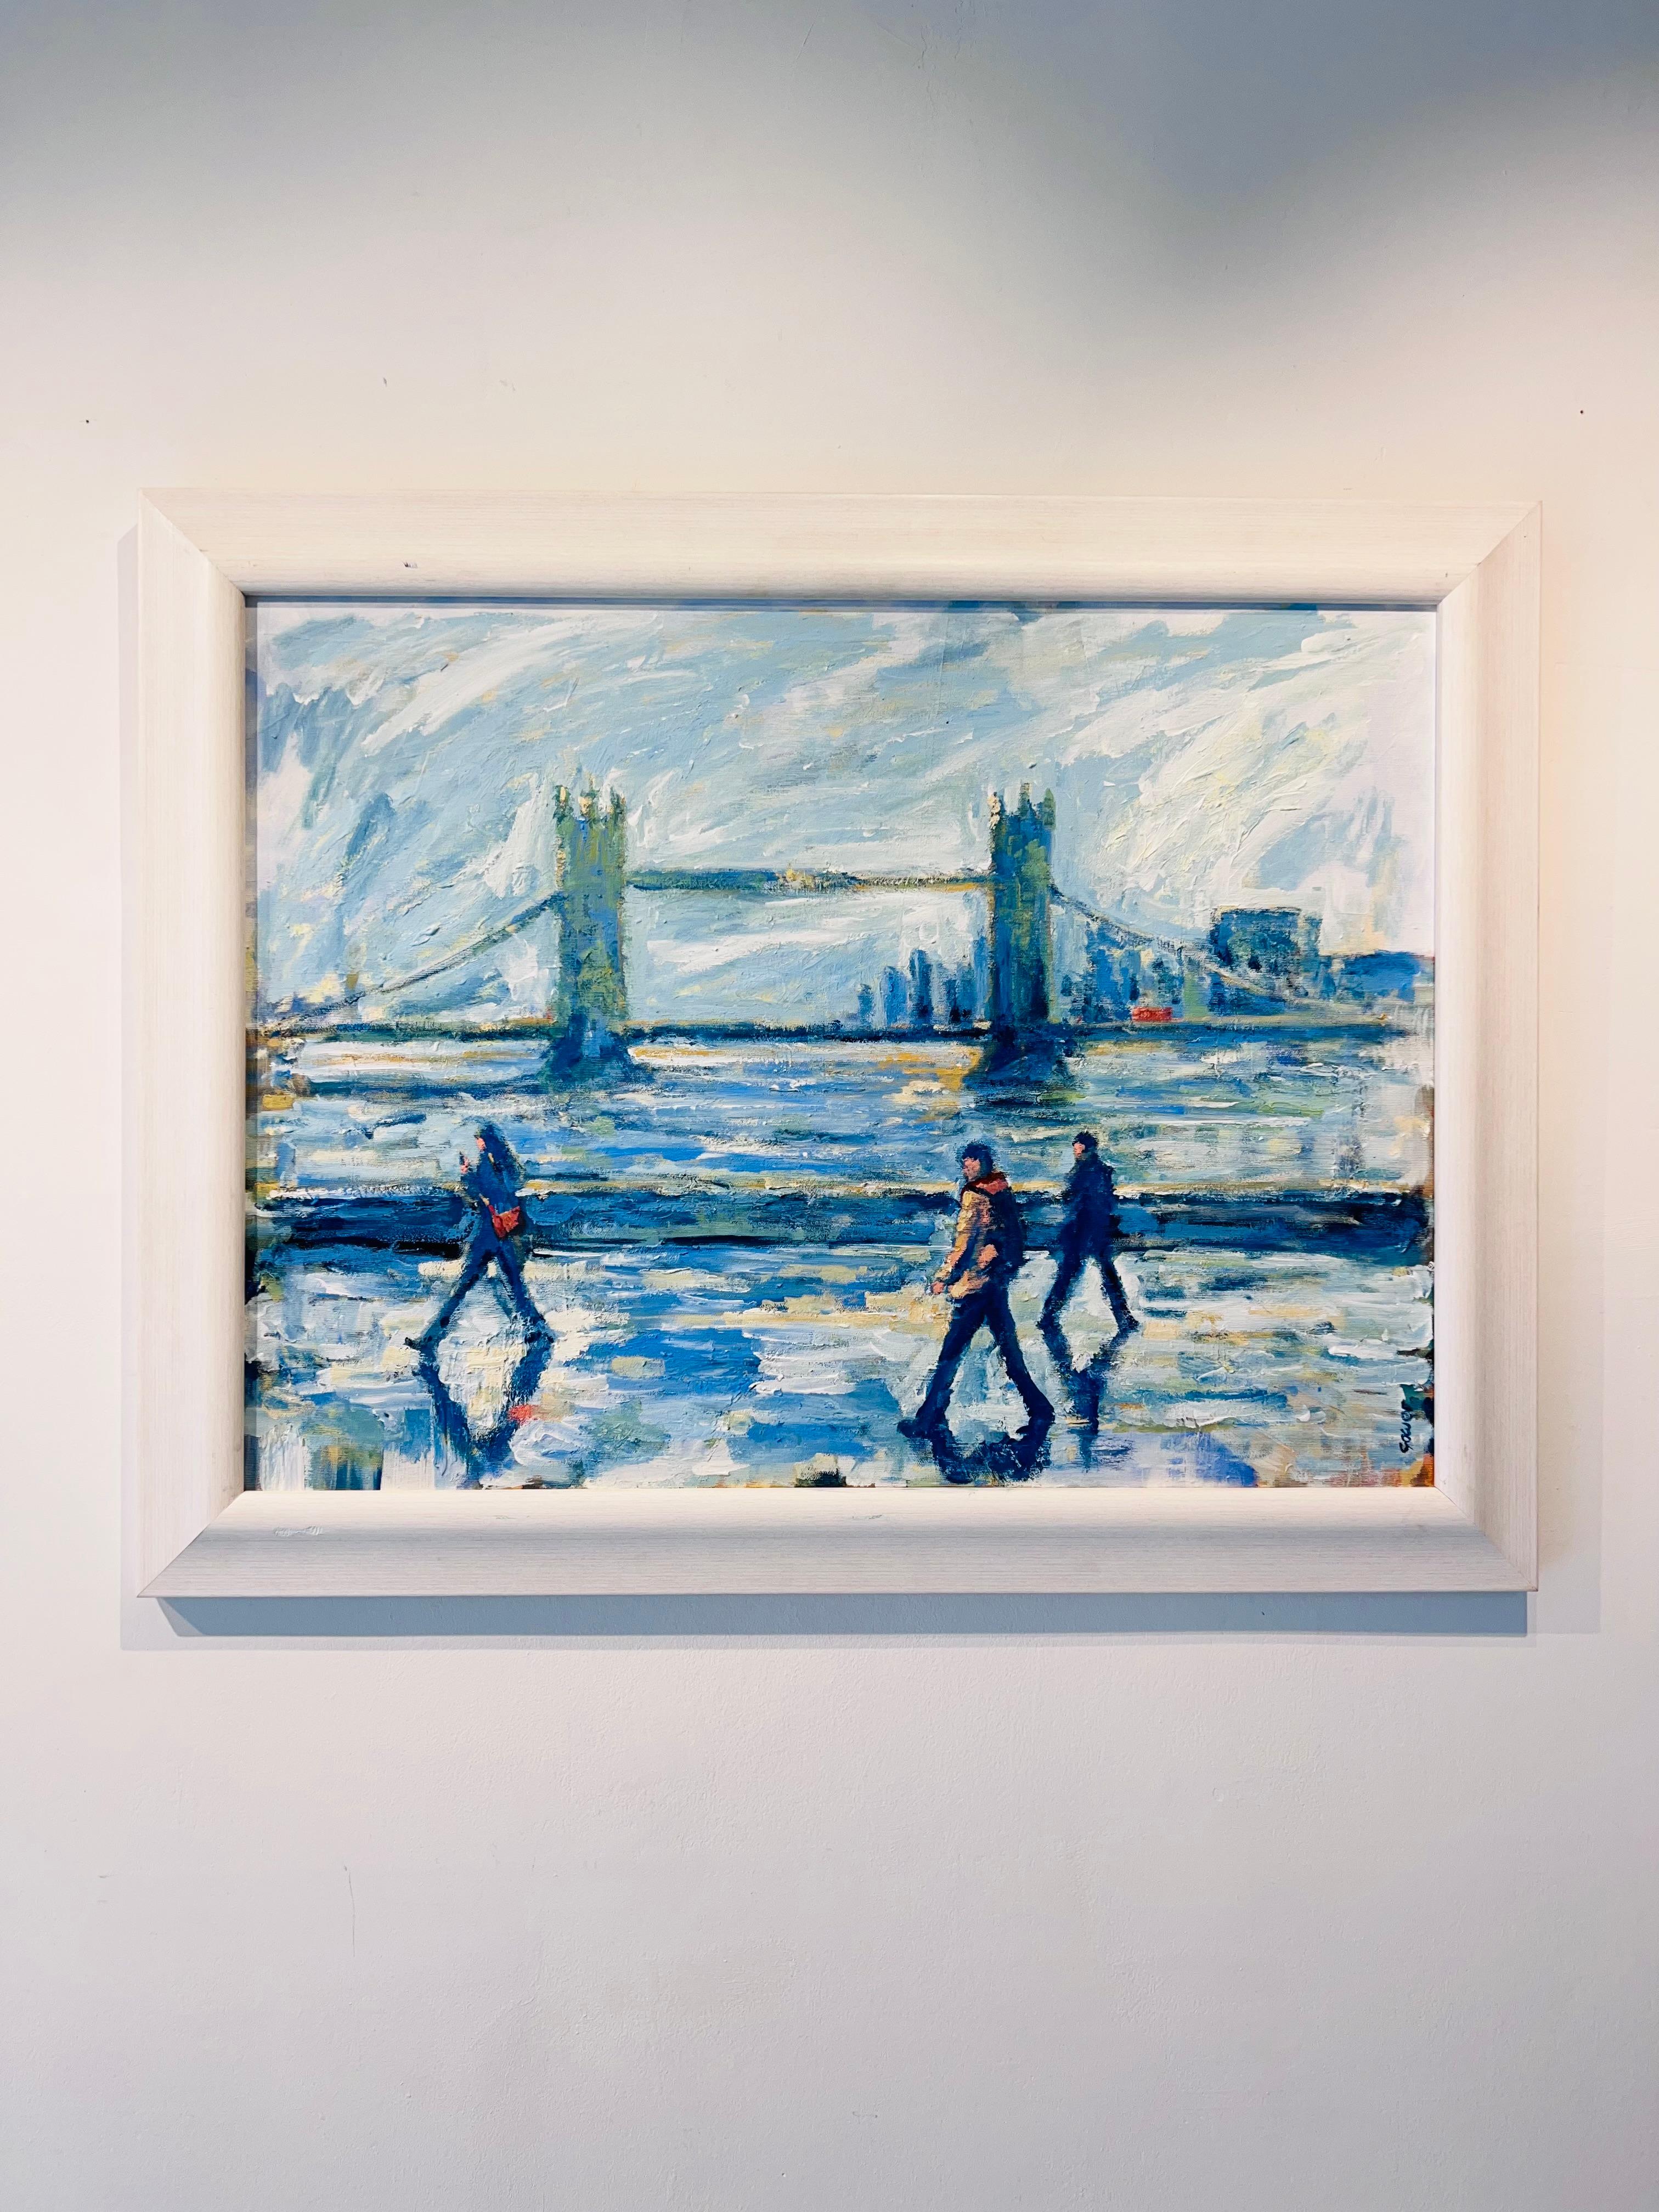 View Of Tower Bridge Passing Ships-original impressionism cityscape painting-Art - Painting by Richard Gower